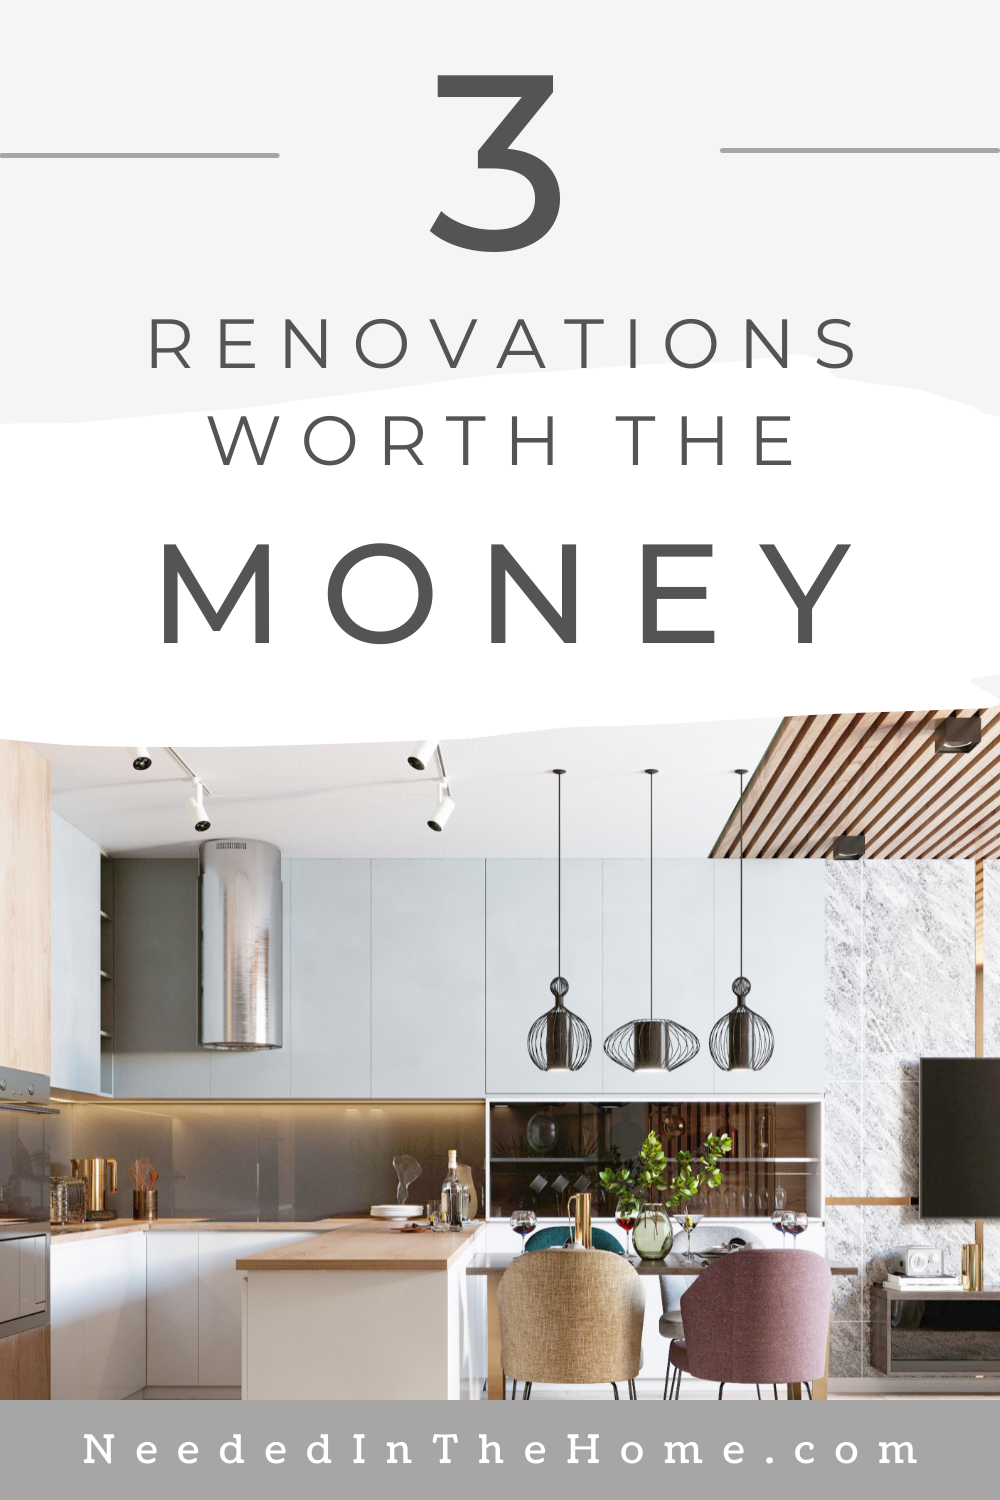 pinterest-pin-description 3 renovations worth the money contemporary kitchen with island lighting neededinthehome